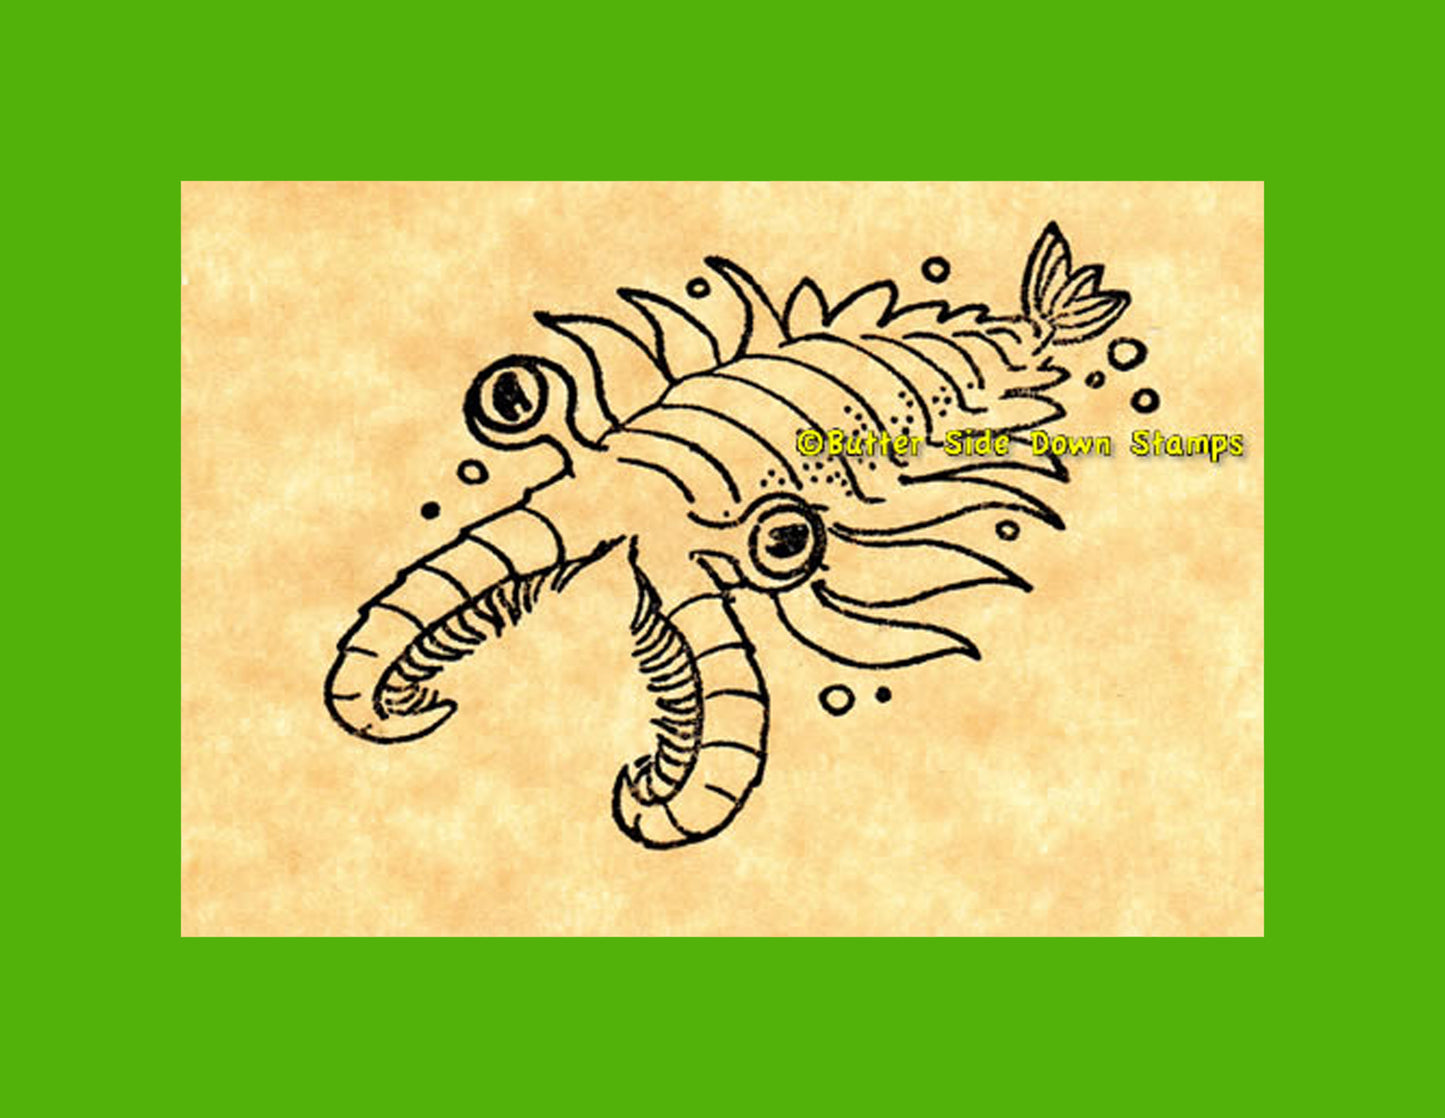 Angry Anomalocaris Burgess Shale Fossil Rubber Stamp